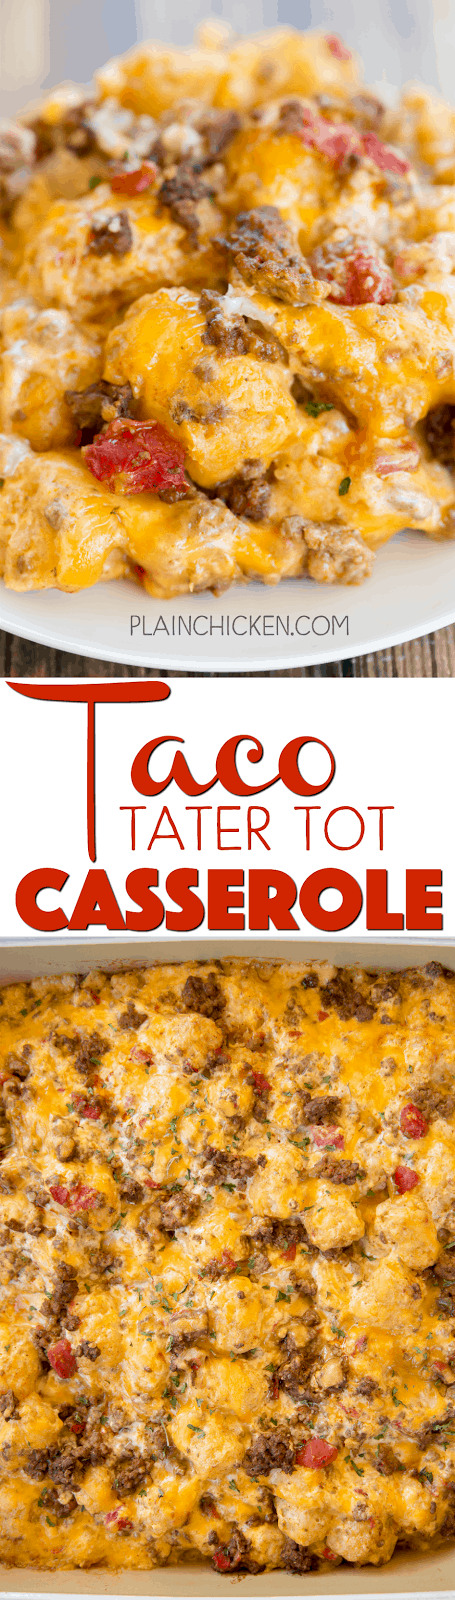 Taco Tater Tot Casserole - taco meat, diced tomatoes and green chiles, cheese, cheese soup, sour cream and tater tots - what's not to love? We ate this twice in one day! Can be made ahead of time and refrigerated or frozen for later. You can also divide it between two 8x8-inch foil pans and freeze one.  Taco night will never be the same!